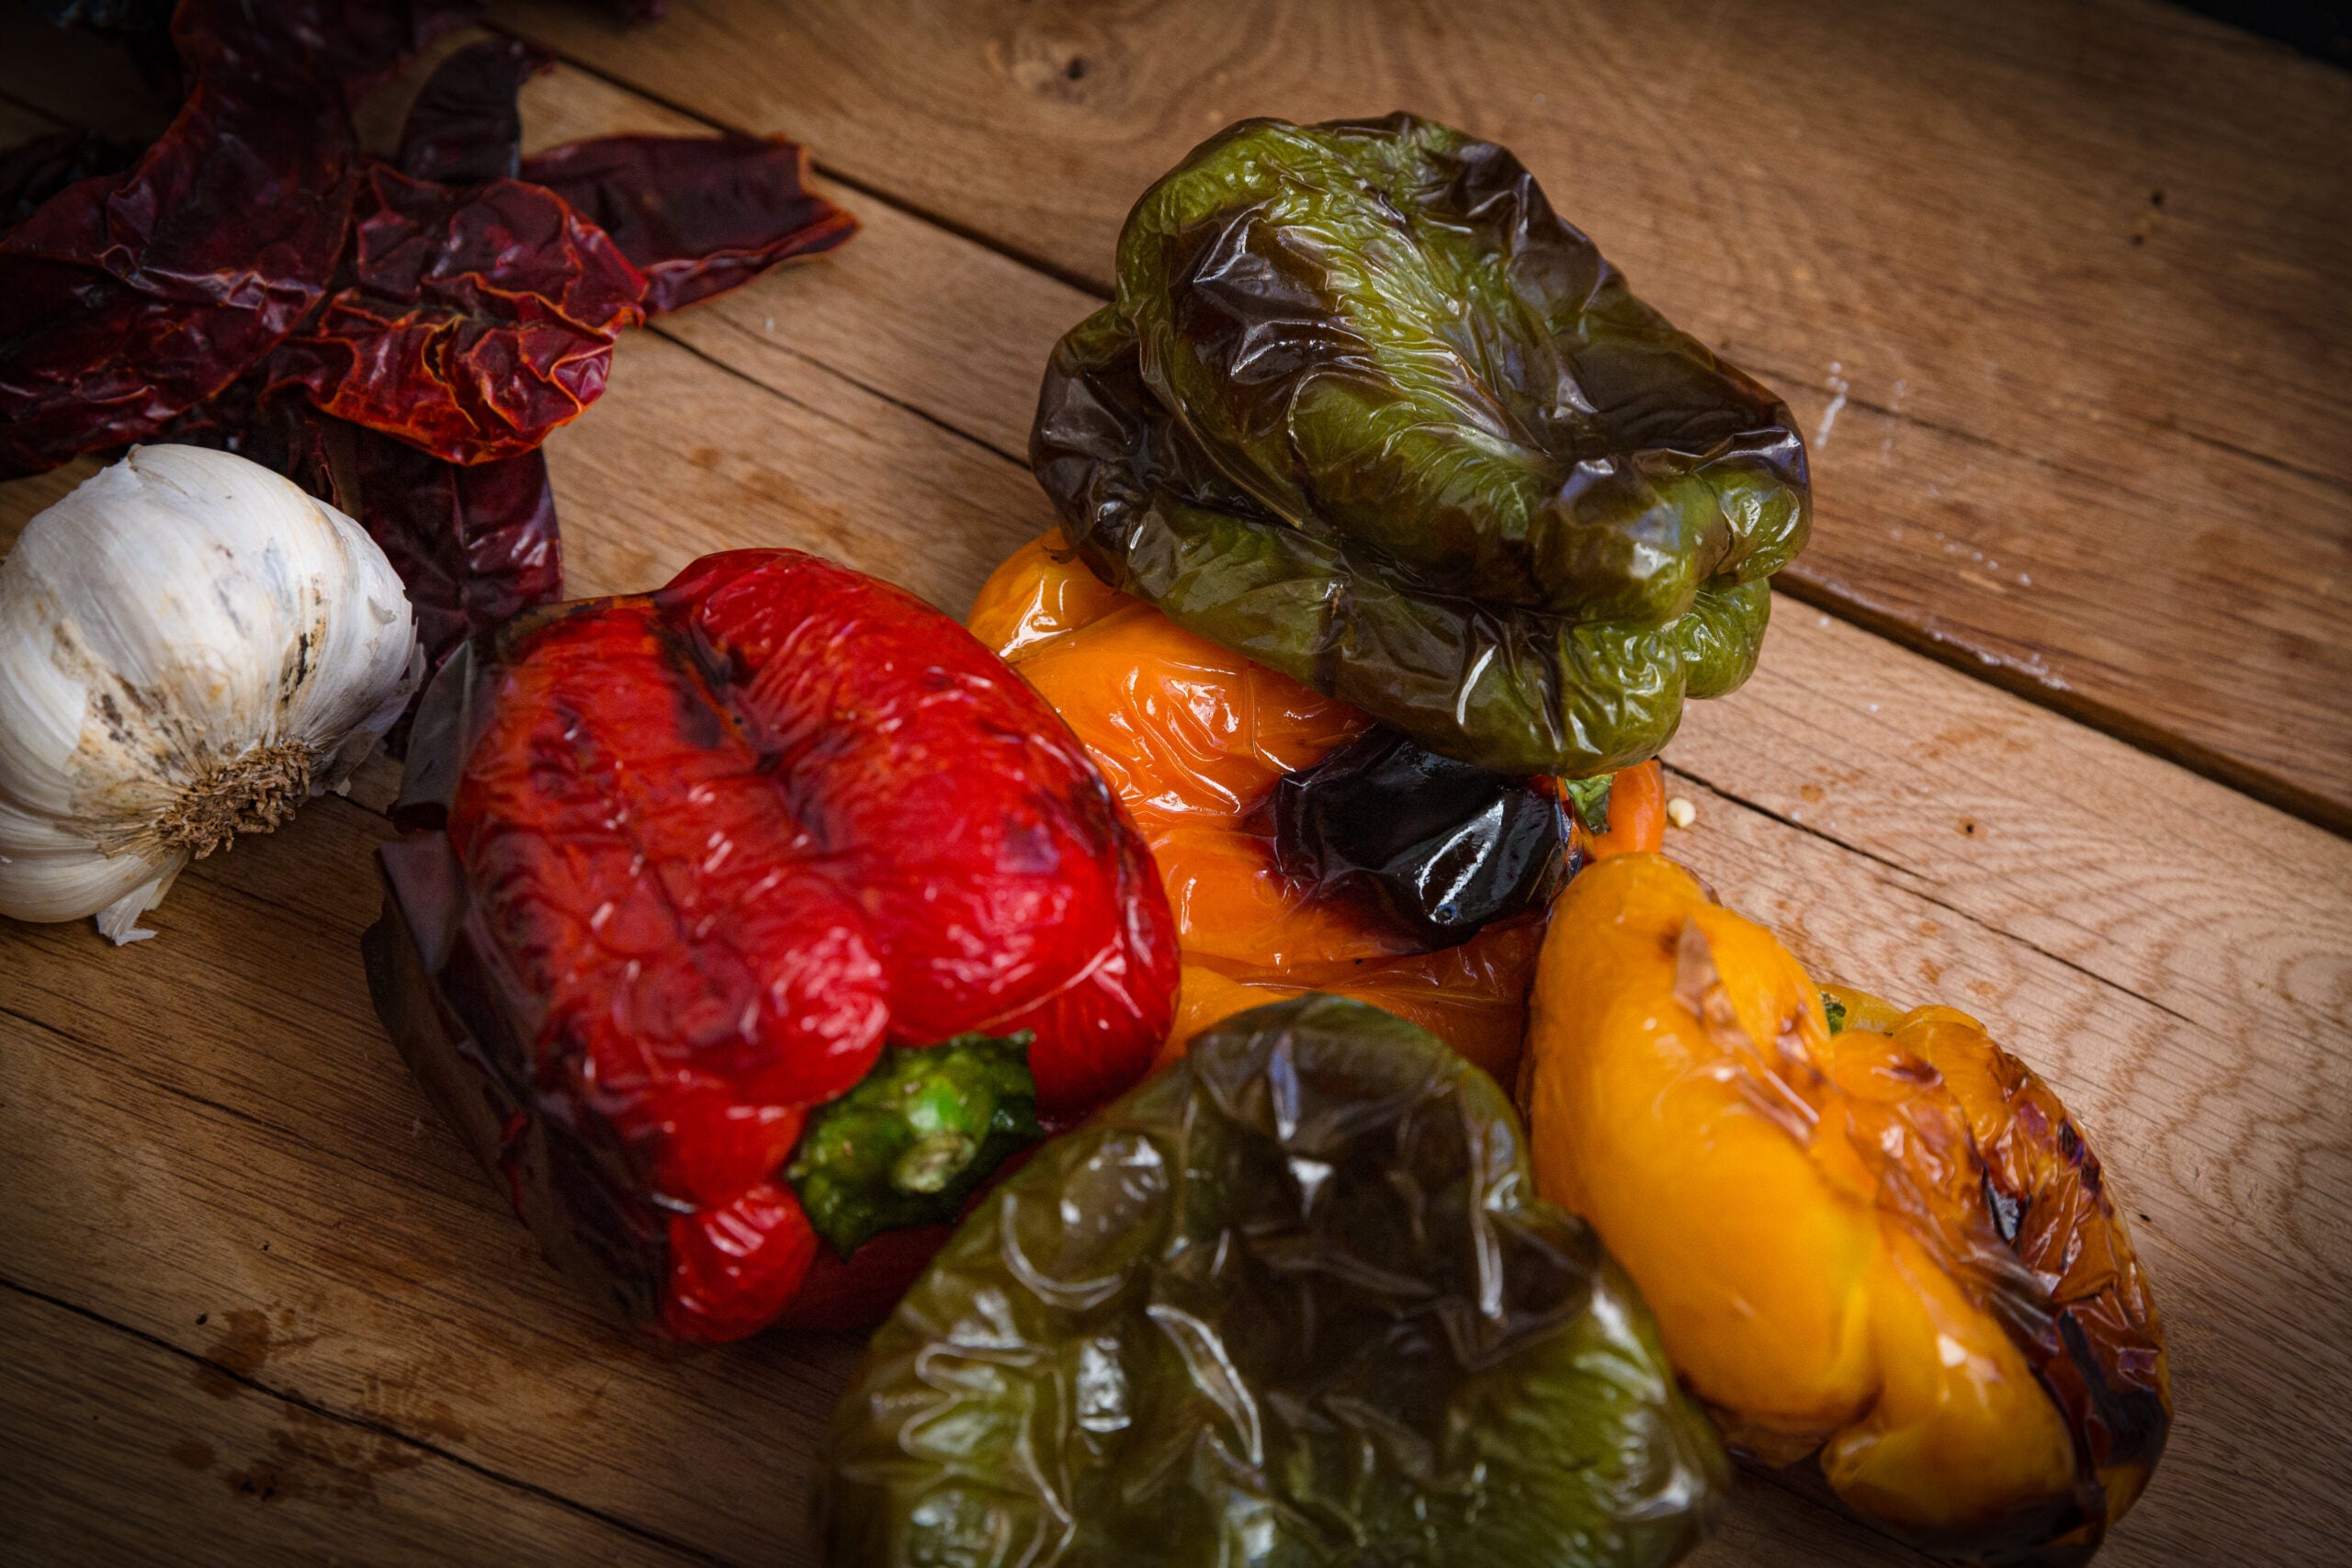 An assortment of roasted bell peppers resting on a wooden cutting board.